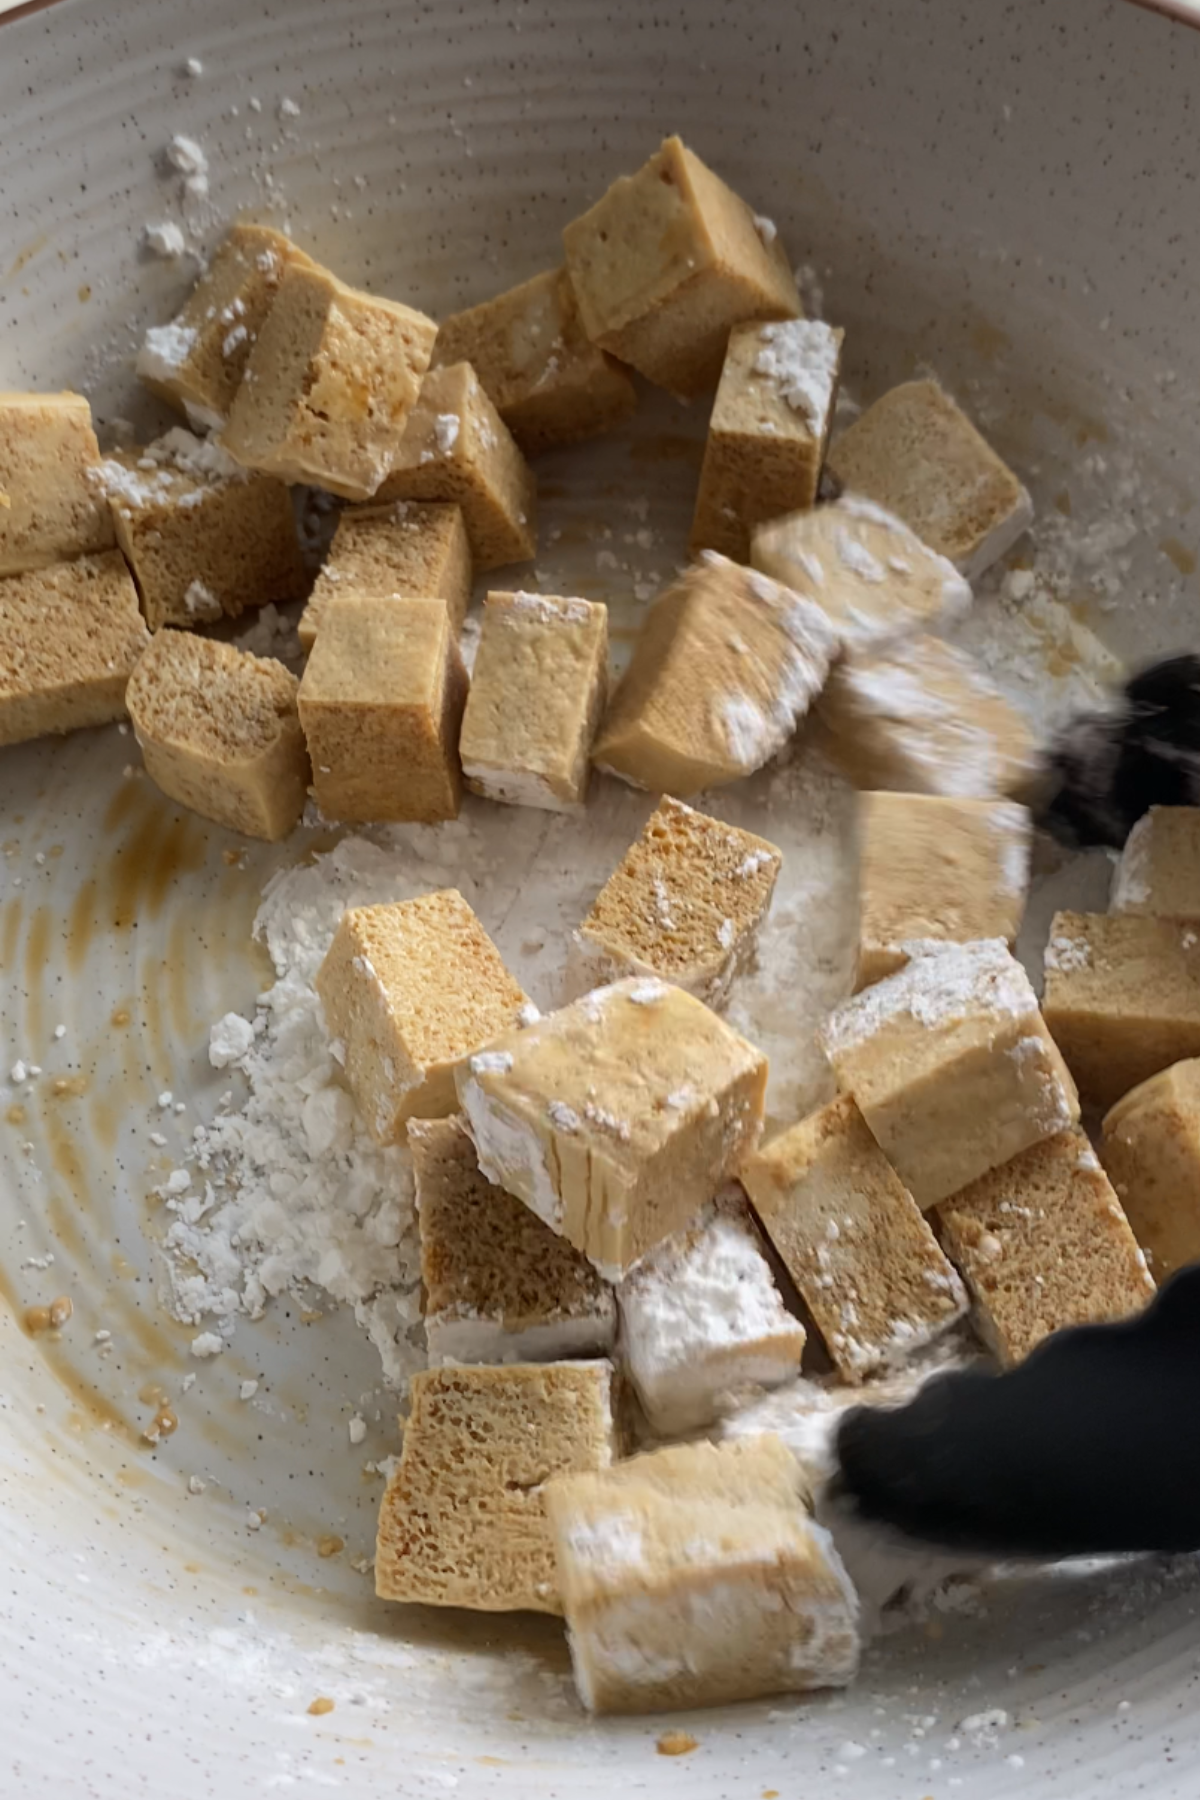 Mixing tofu with soya sauce and corn starch.